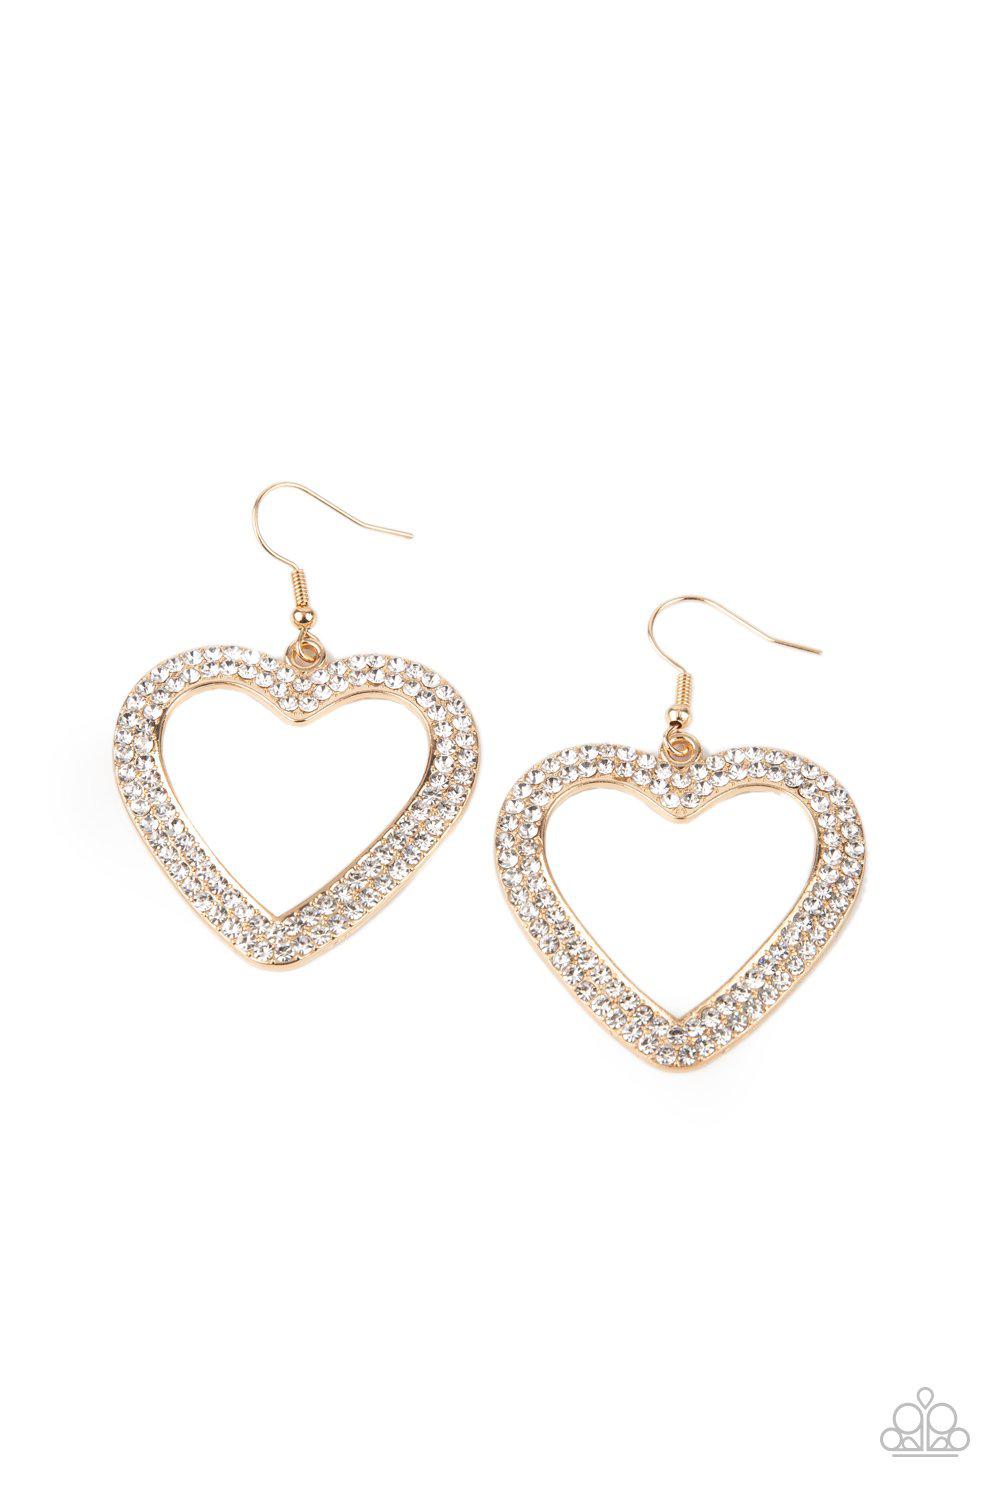 GLISTEN To Your Heart Gold and White Rhinestone Heart Earrings - Paparazzi Accessories - lightbox -CarasShop.com - $5 Jewelry by Cara Jewels